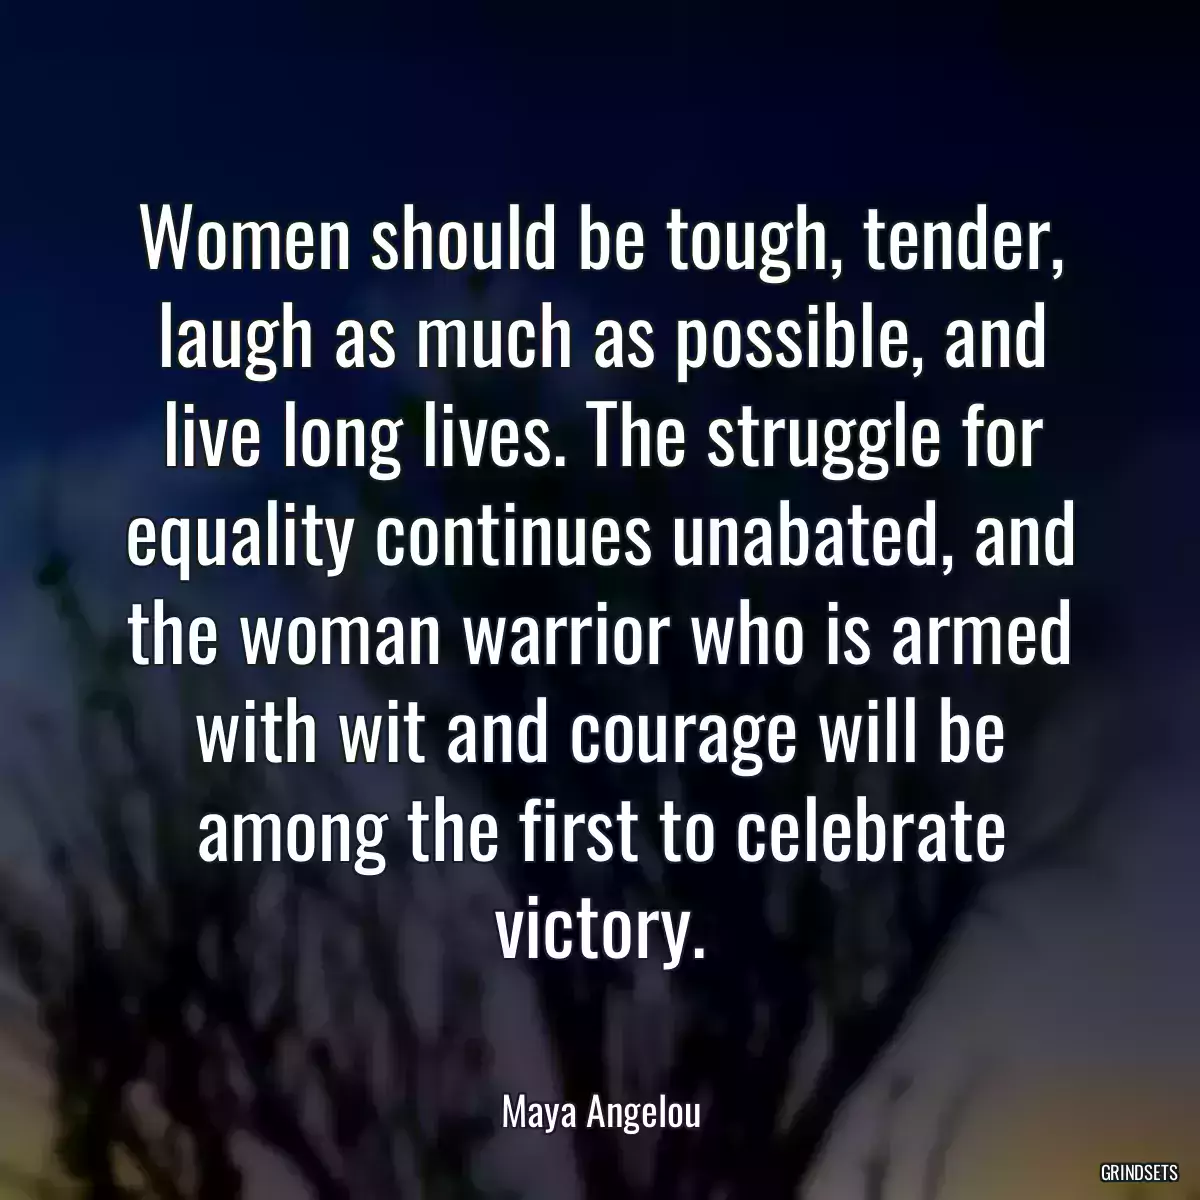 Women should be tough, tender, laugh as much as possible, and live long lives. The struggle for equality continues unabated, and the woman warrior who is armed with wit and courage will be among the first to celebrate victory.